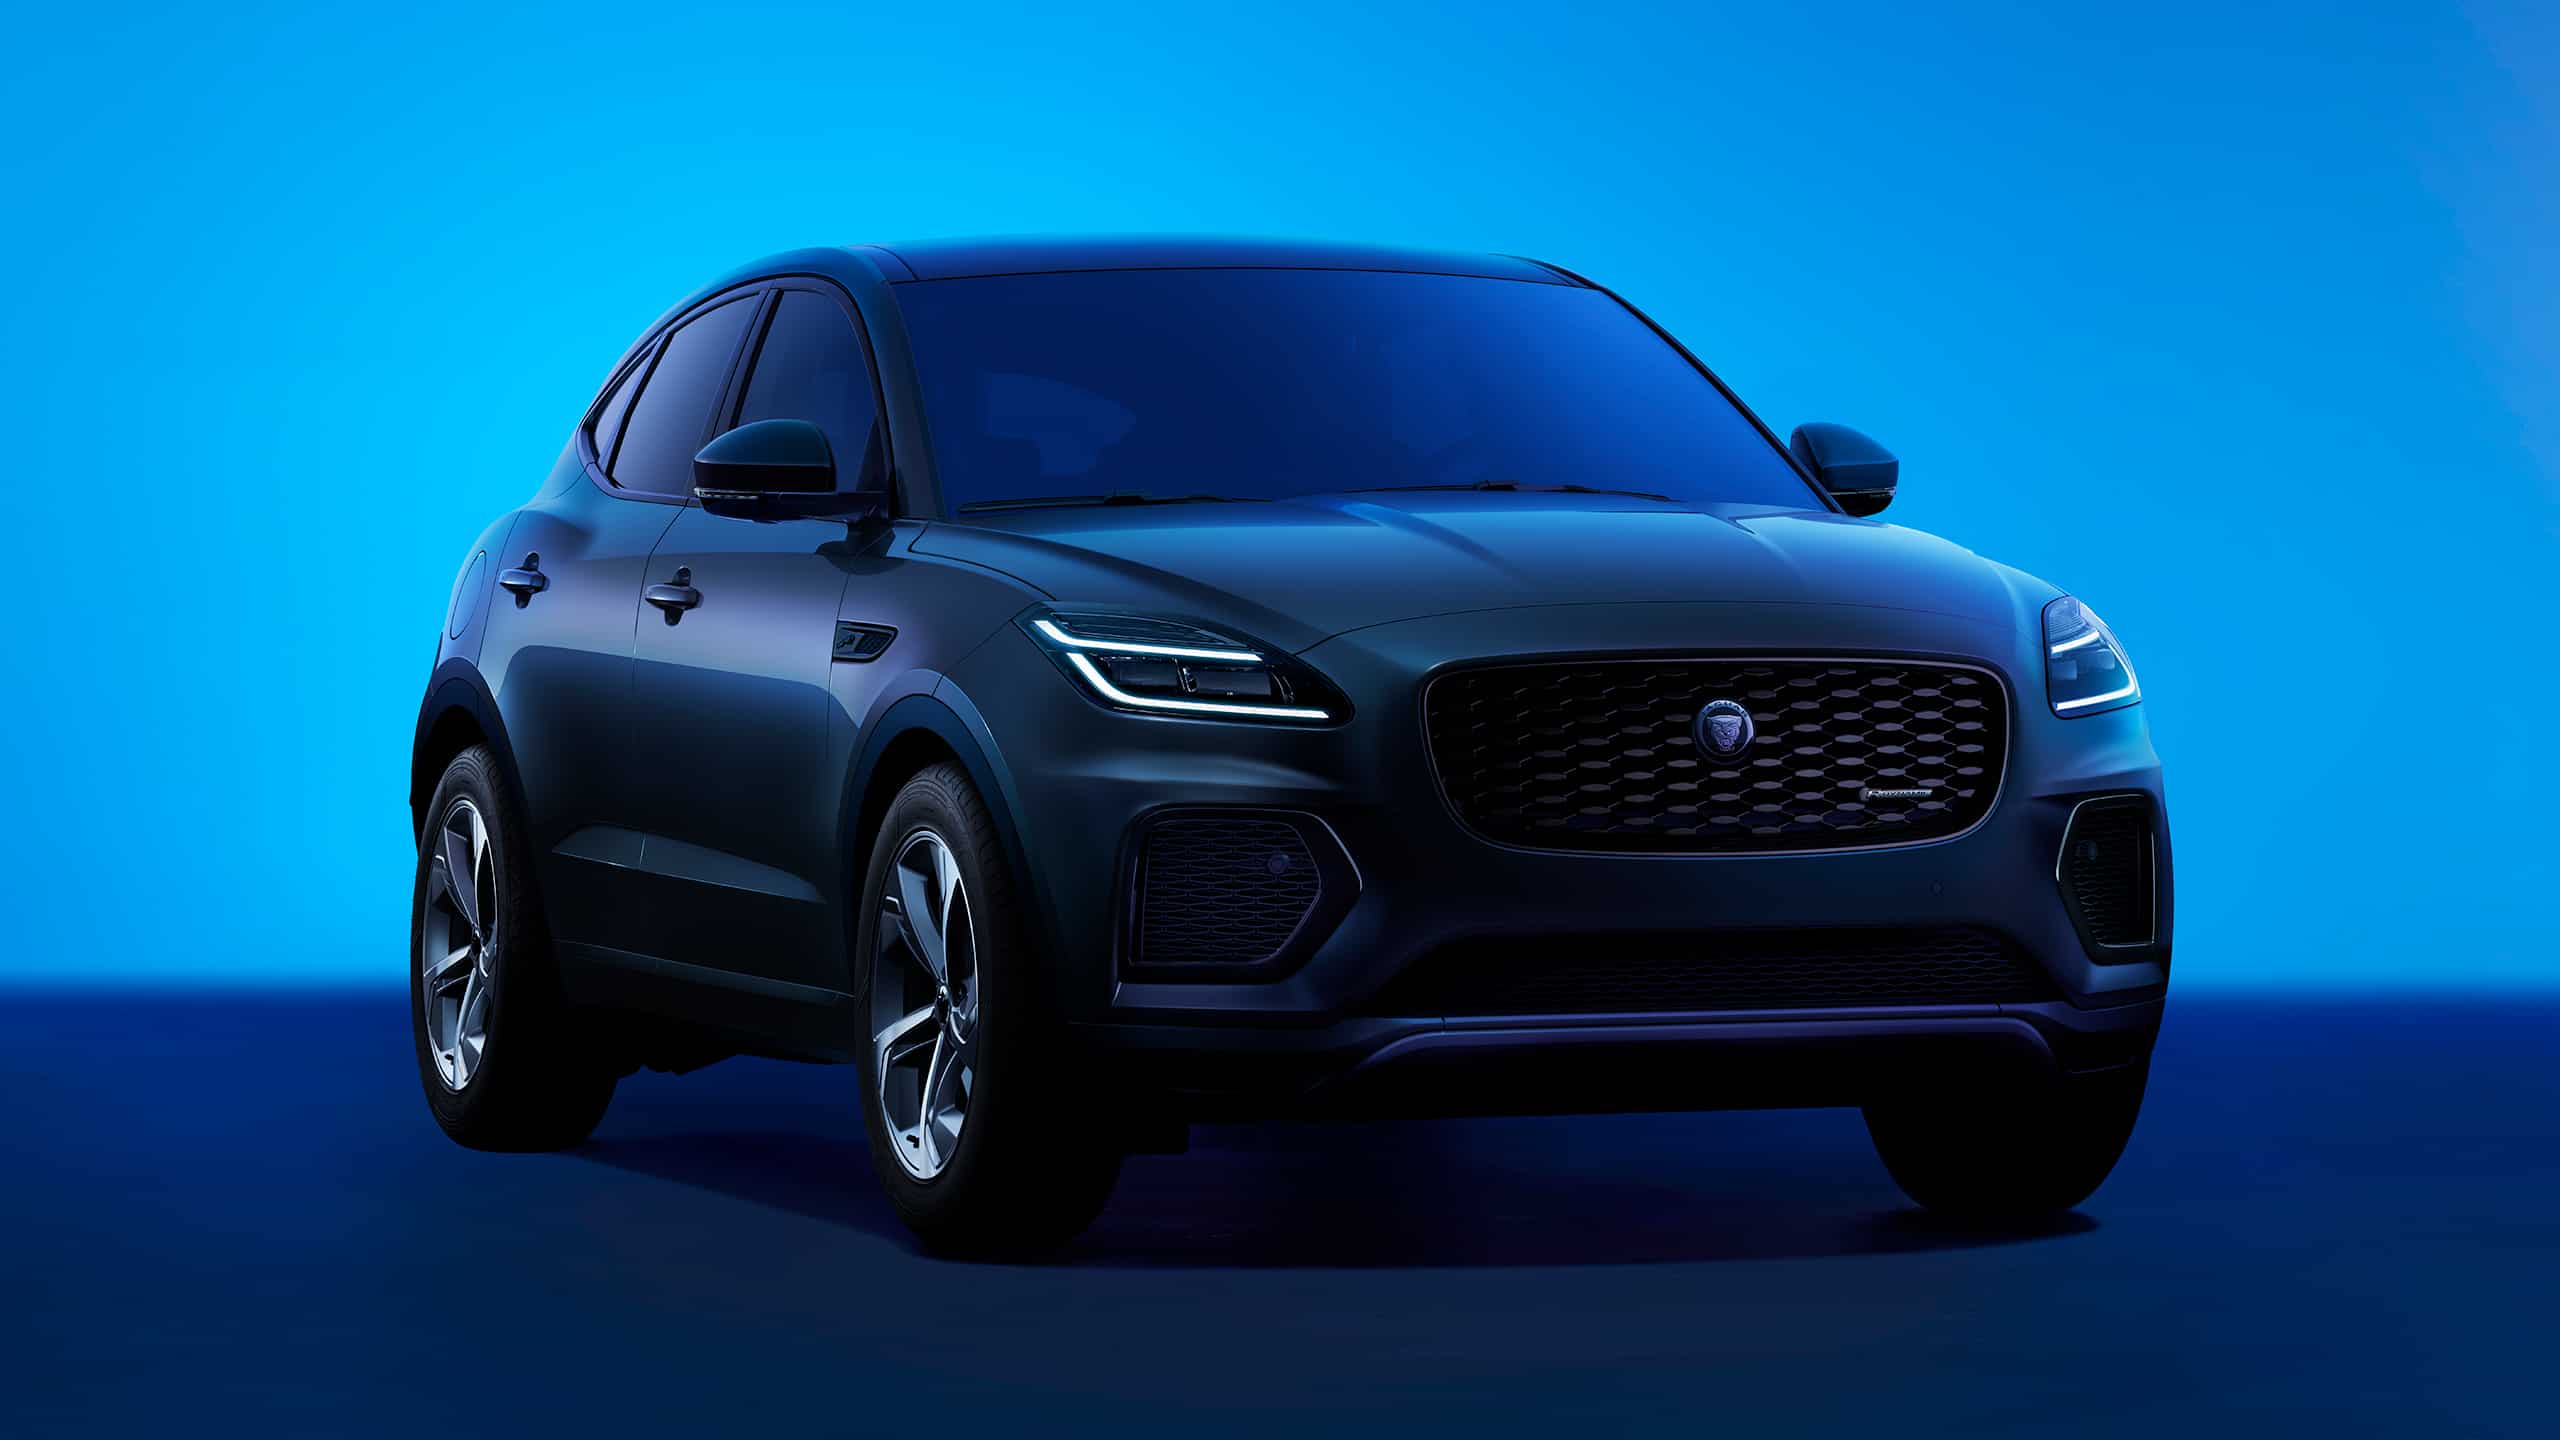 Jaguar E-Pace R-dyanamic SEmodel in shades of blue background